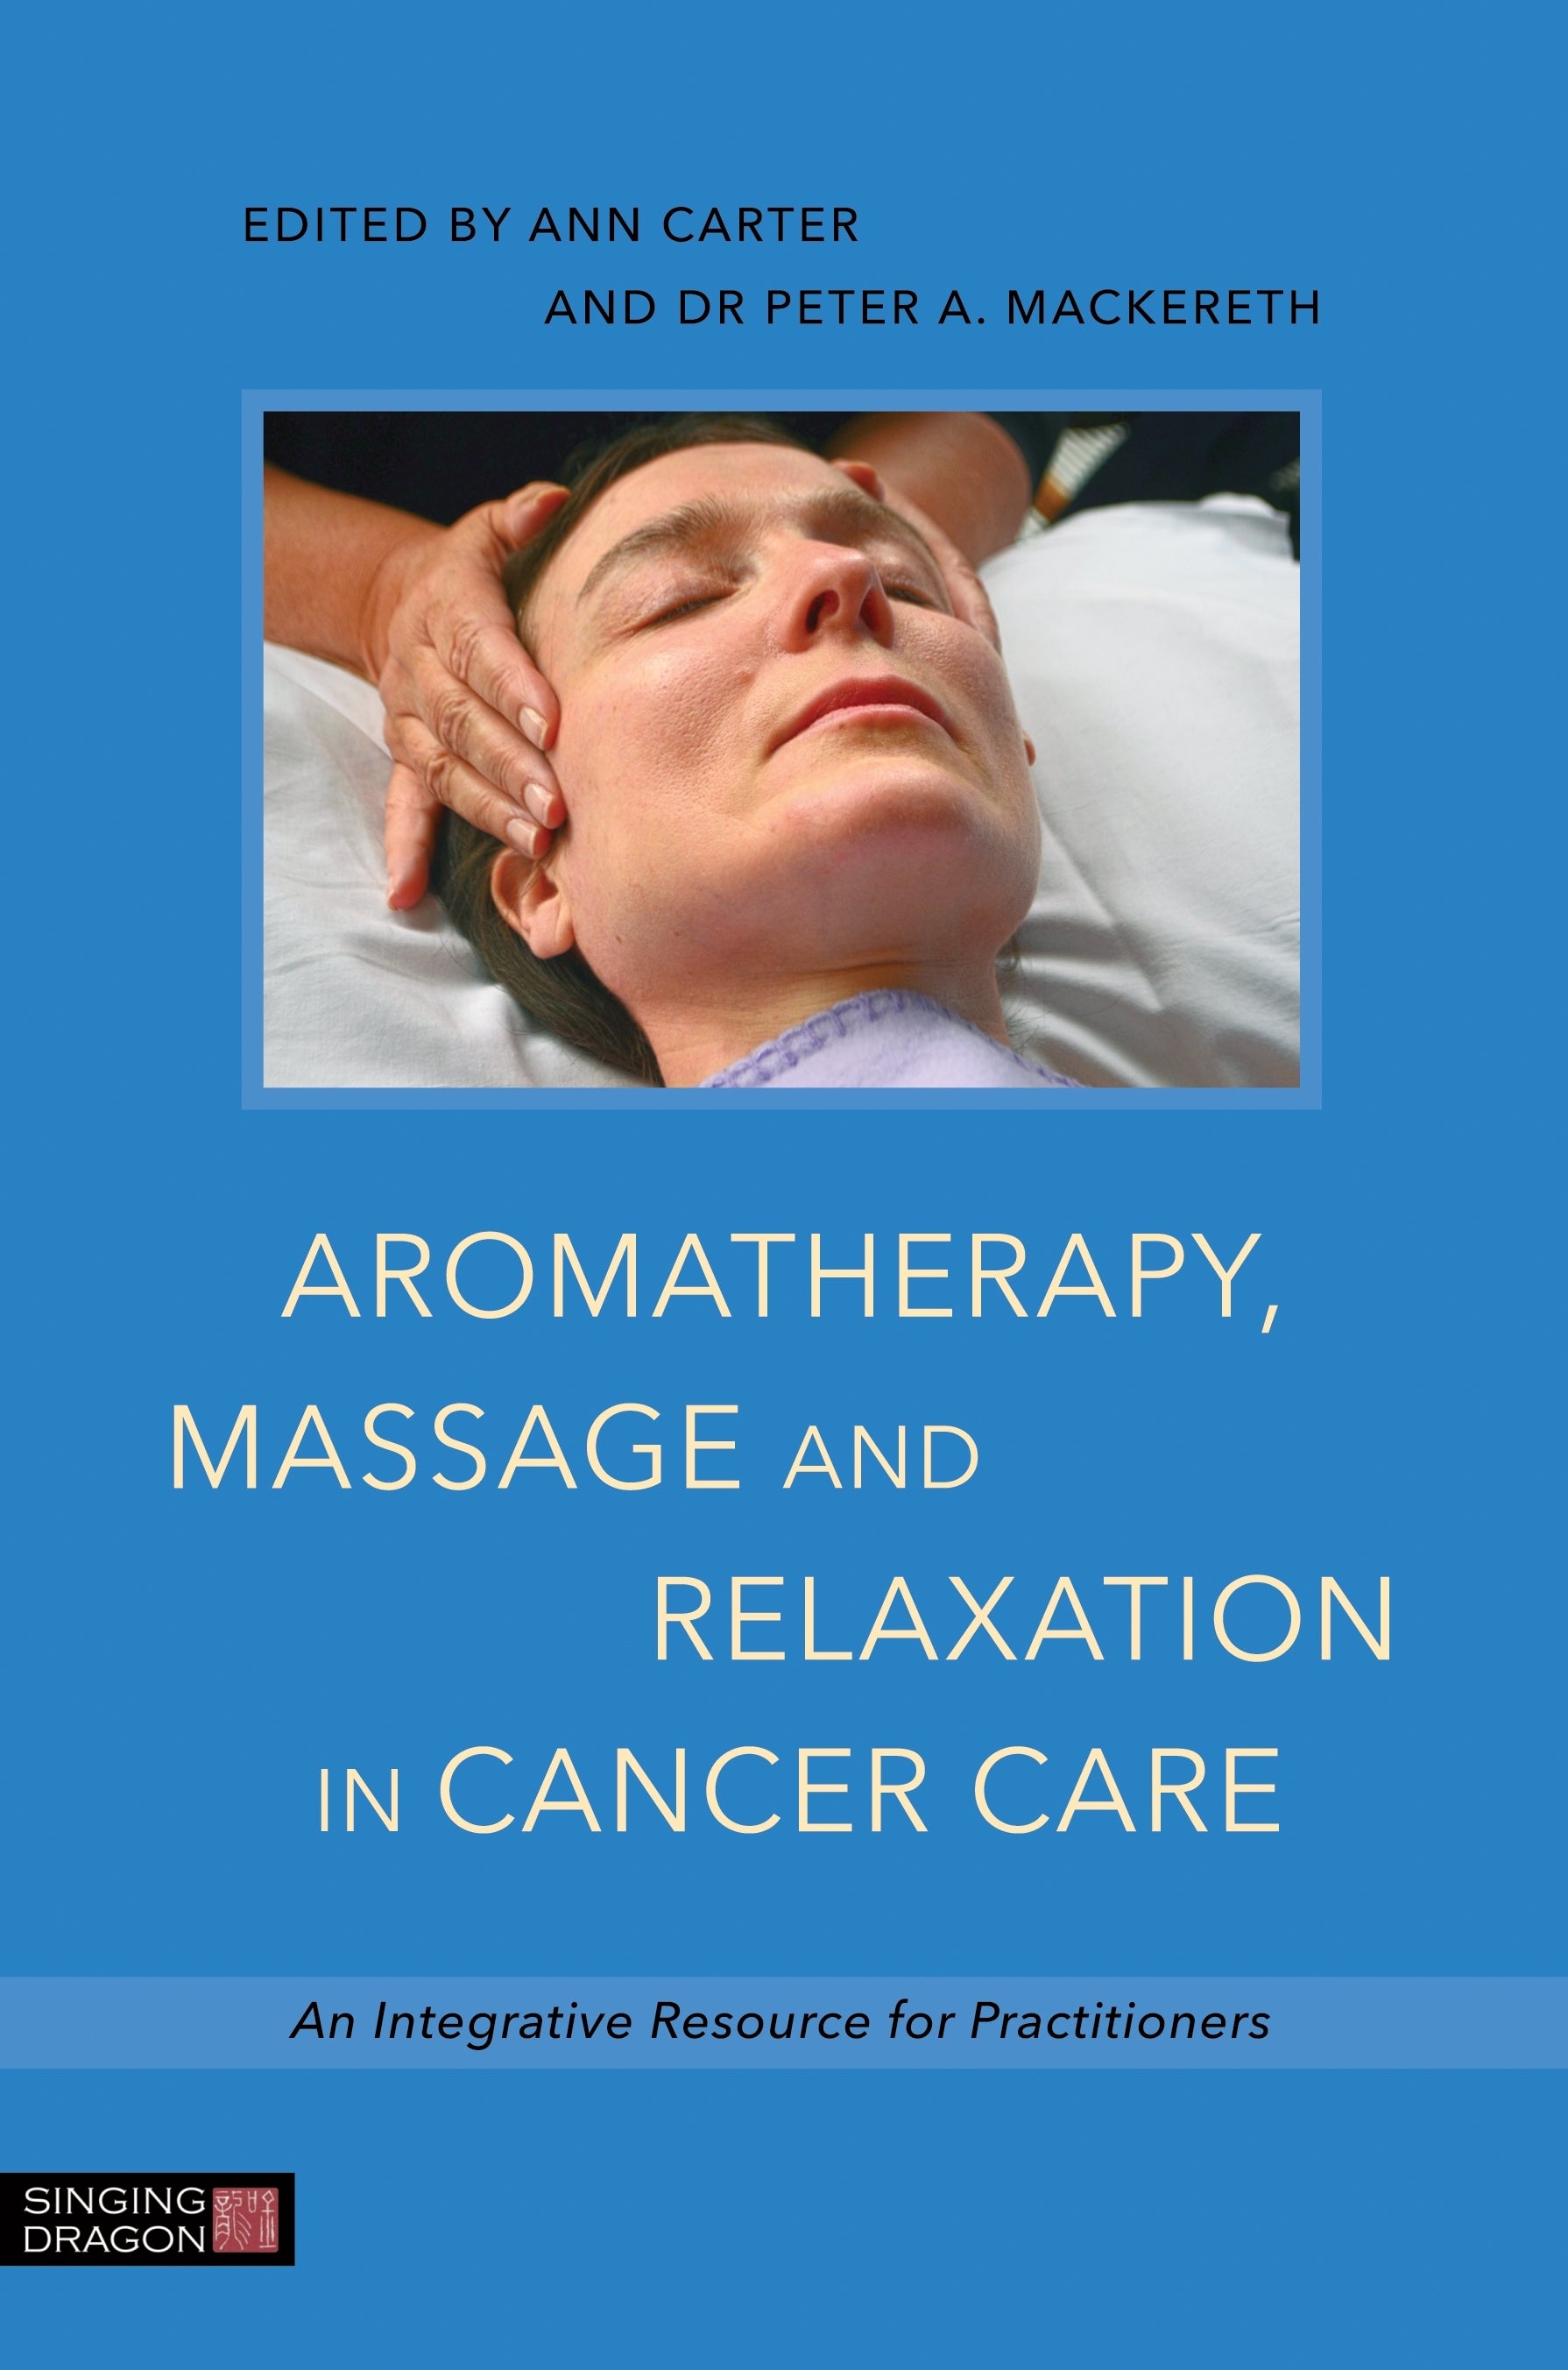 Aromatherapy, Massage and Relaxation in Cancer Care by Dr Peter A. Mackereth, Ann Carter, Anne Cawthorn, Deborah Costello, No Author Listed